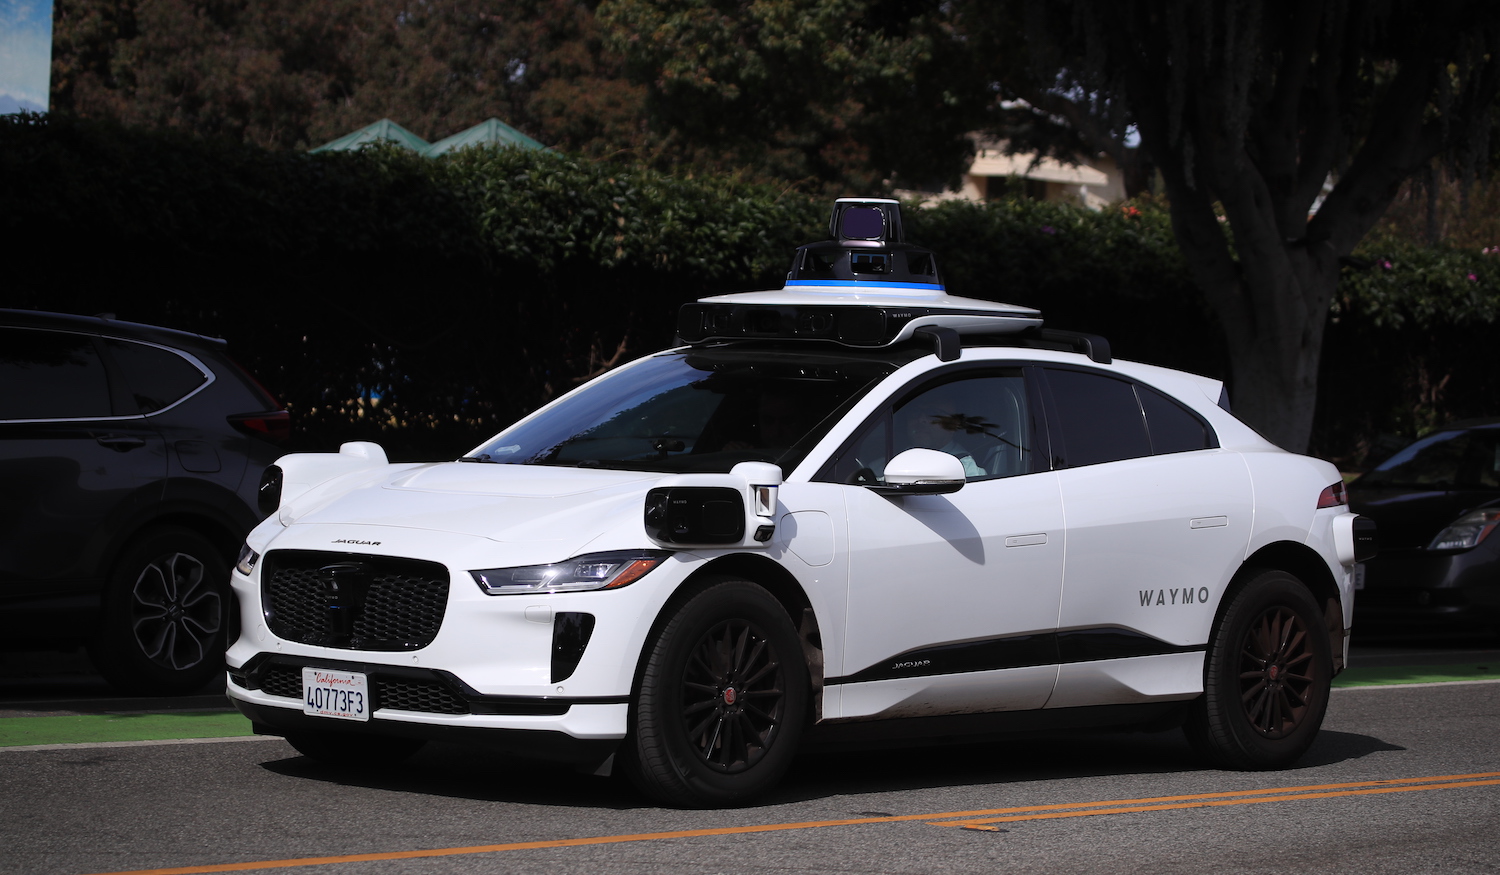 Santa Monica, CA - February 21: Passengers ride in an electric Jaguar I-Pace car outfitted with Waymo full self-driving technology in Santa Monica Tuesday, Feb. 21, 2023. (Allen J. Schaben / Los Angeles Times via Getty Images)